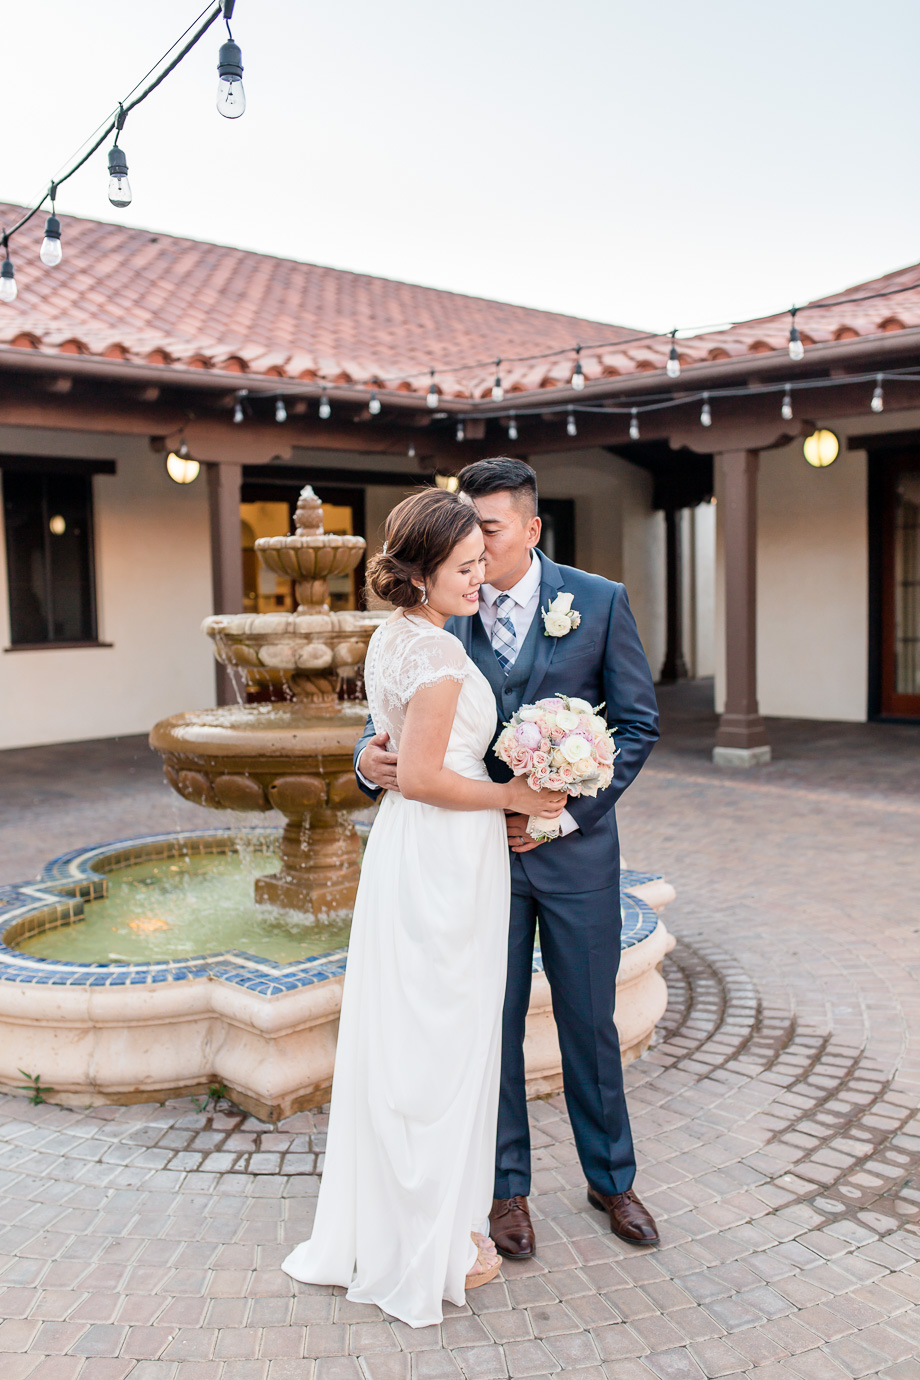 Livermore Garré Winery Martinelli Event Center wedding photo in front of the fountain